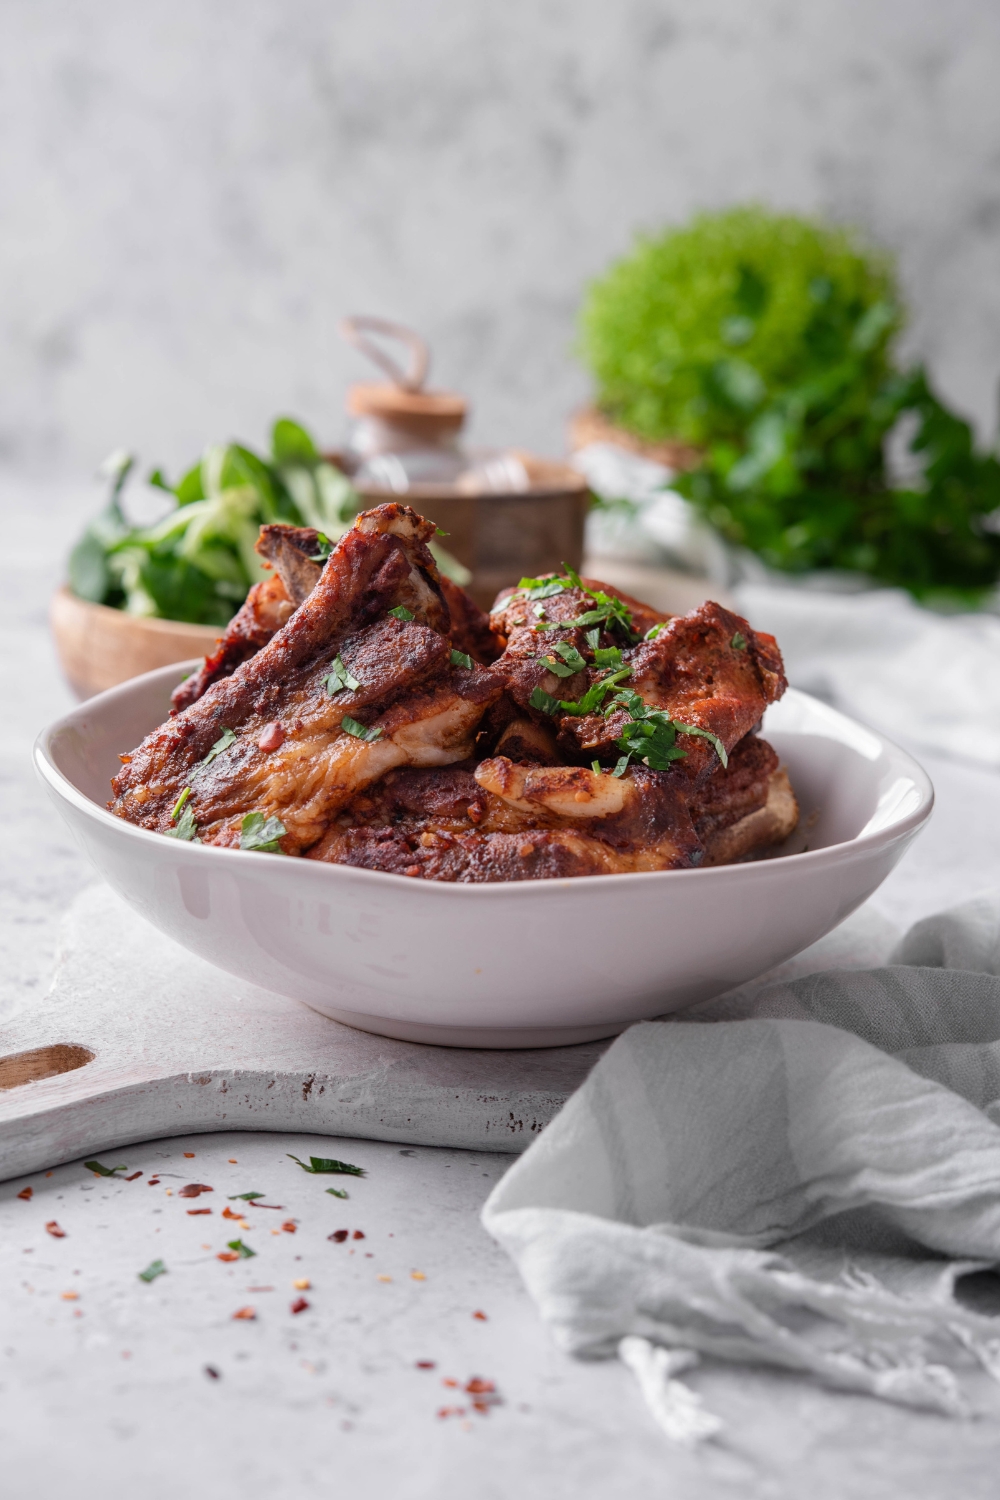 A white bowl is full of country style ribs. The ribs are perfectly cooked and garnished with fresh parsley.